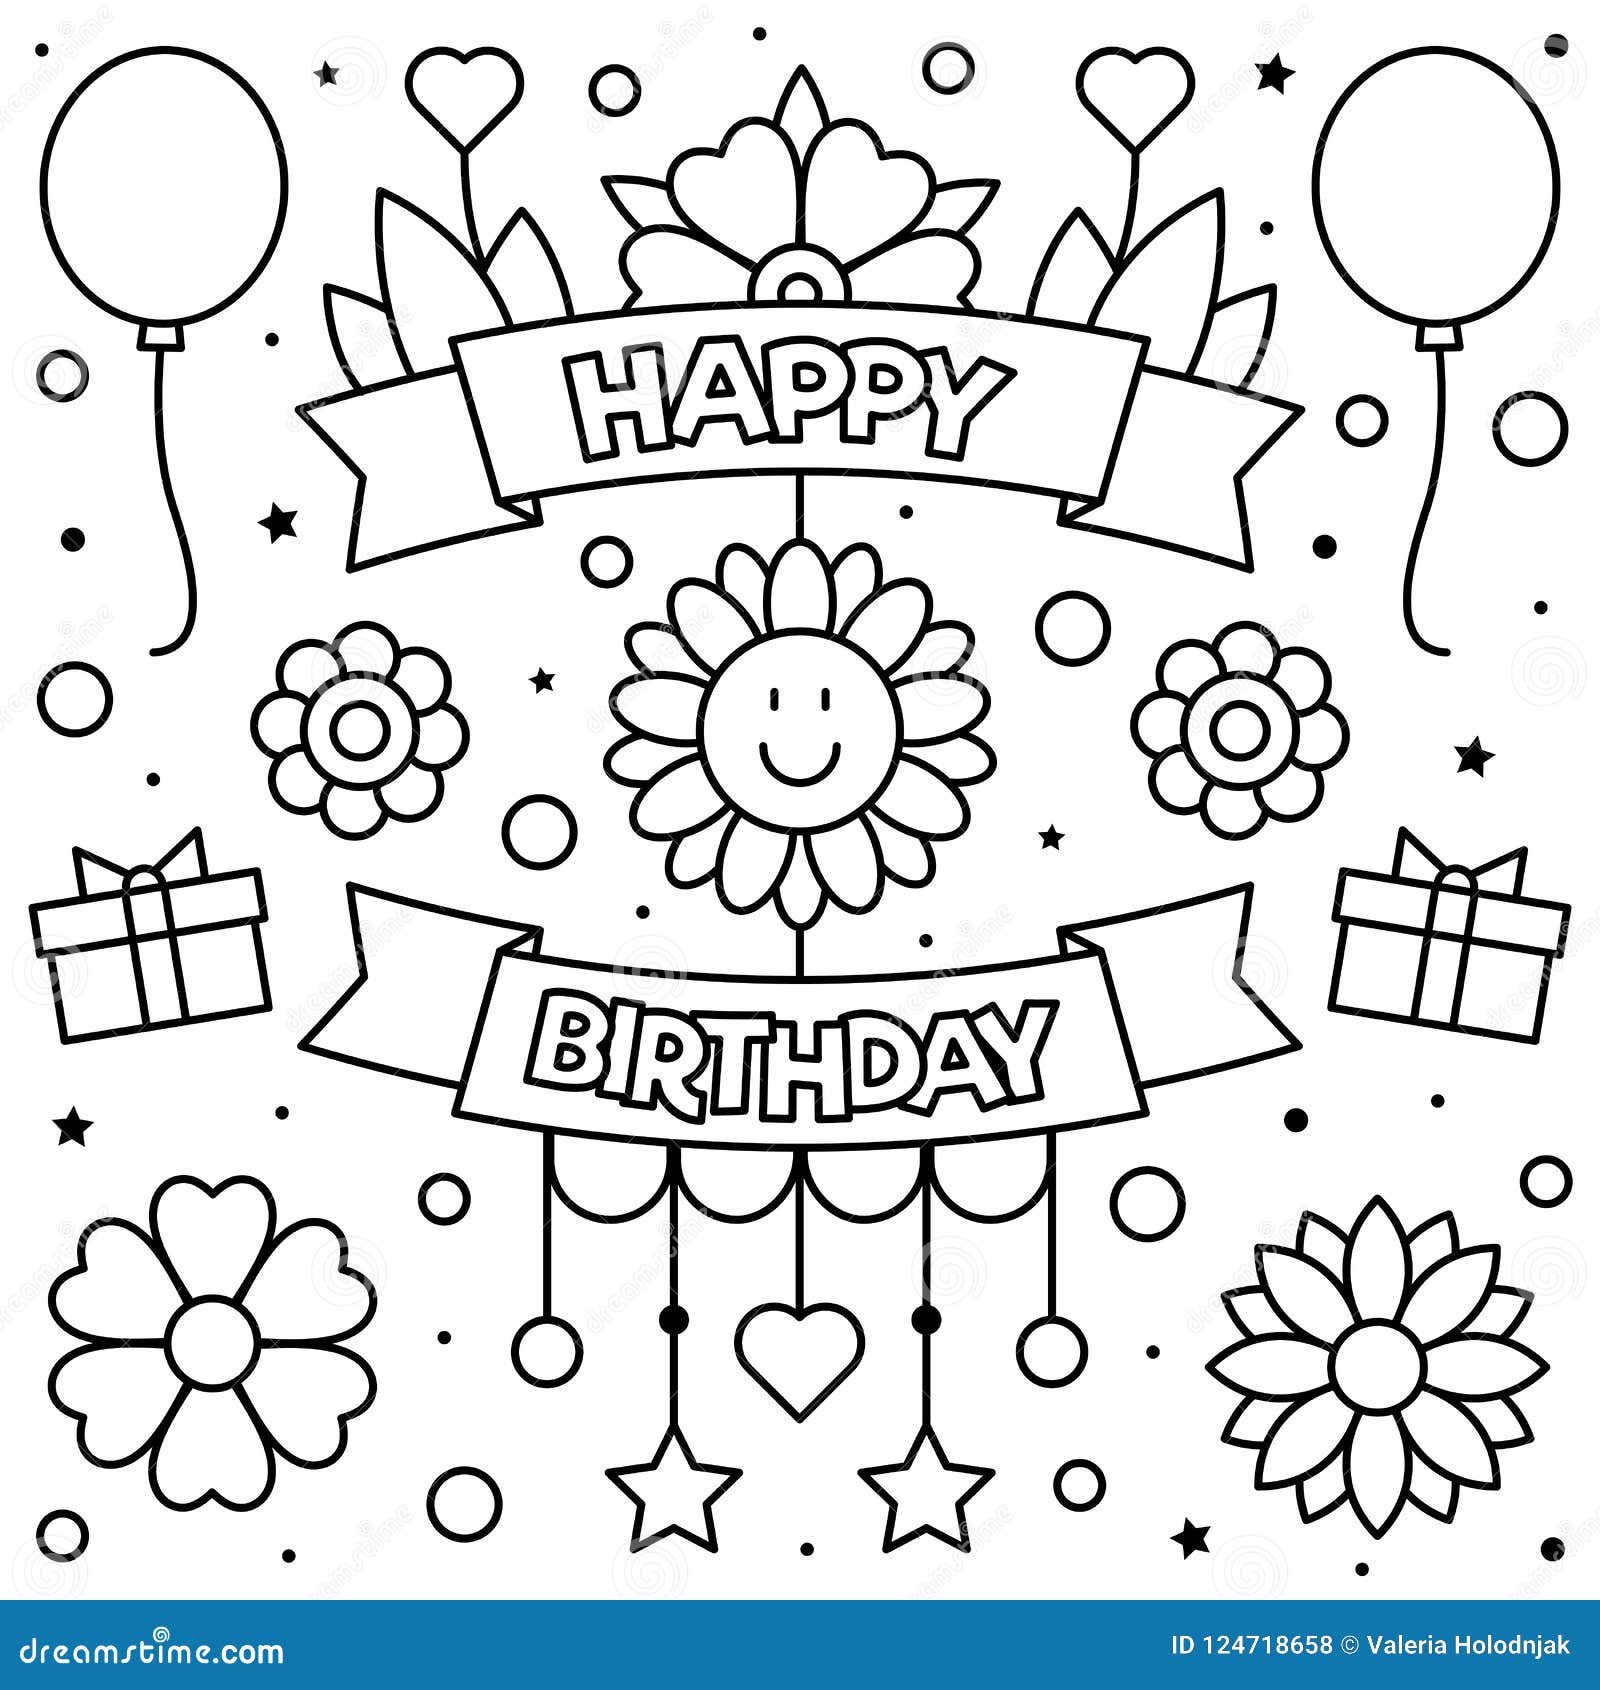 wedding decorations elegant : Mandala Happy Birthday Coloring Pages For ...